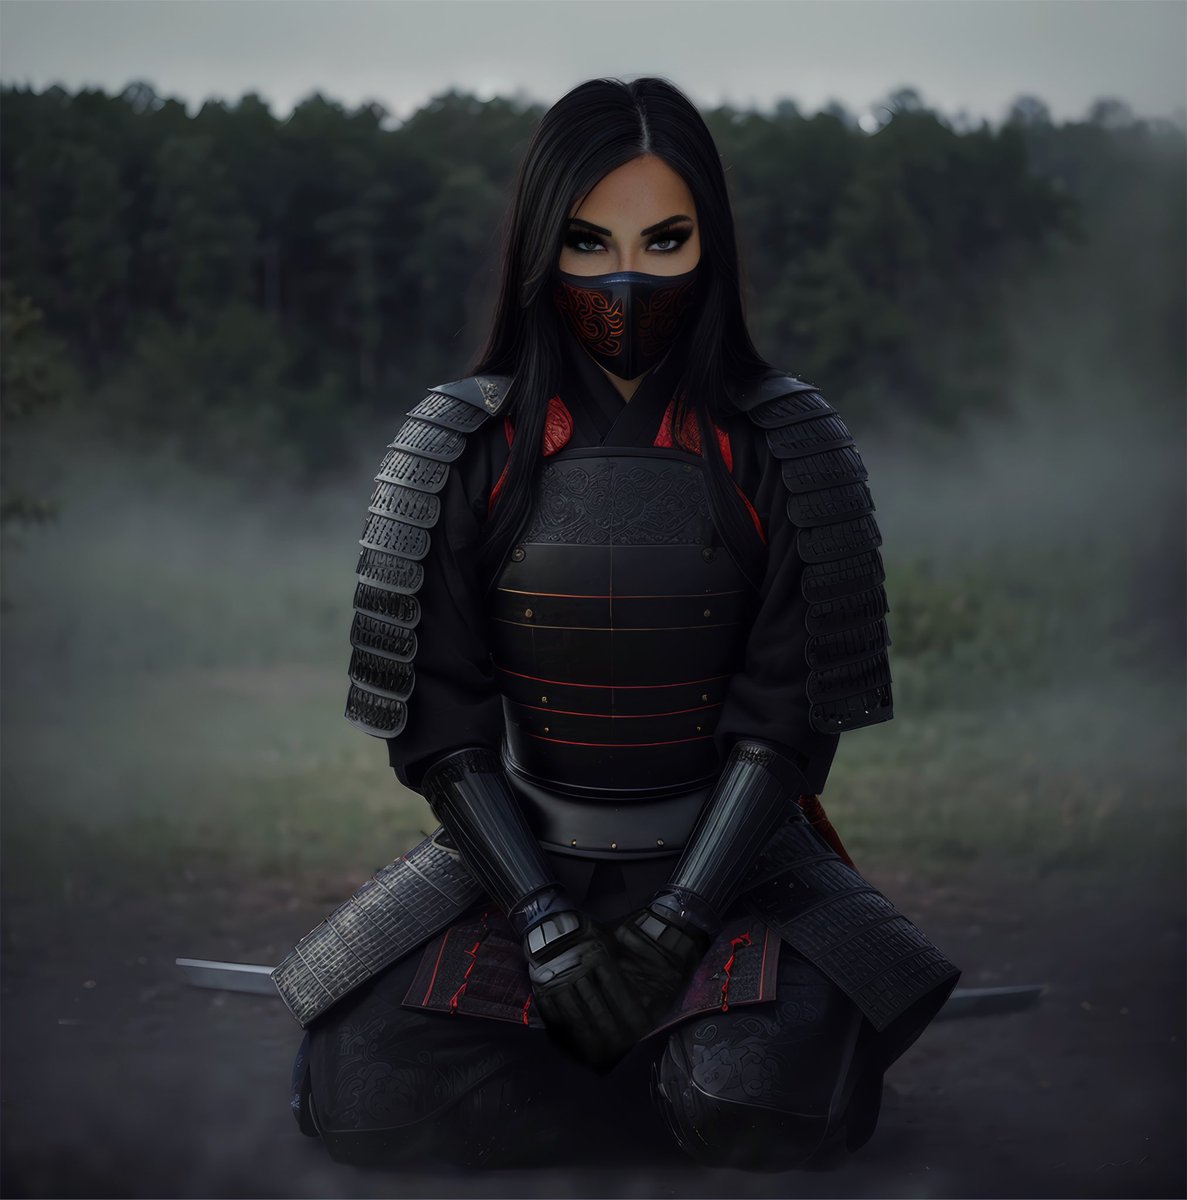 Channeling the spirit of a samurai, inspired by the captivating tales of ‘Shogun’ from the Disney FX series. #shogun #samurai #cosplay #jadacameo